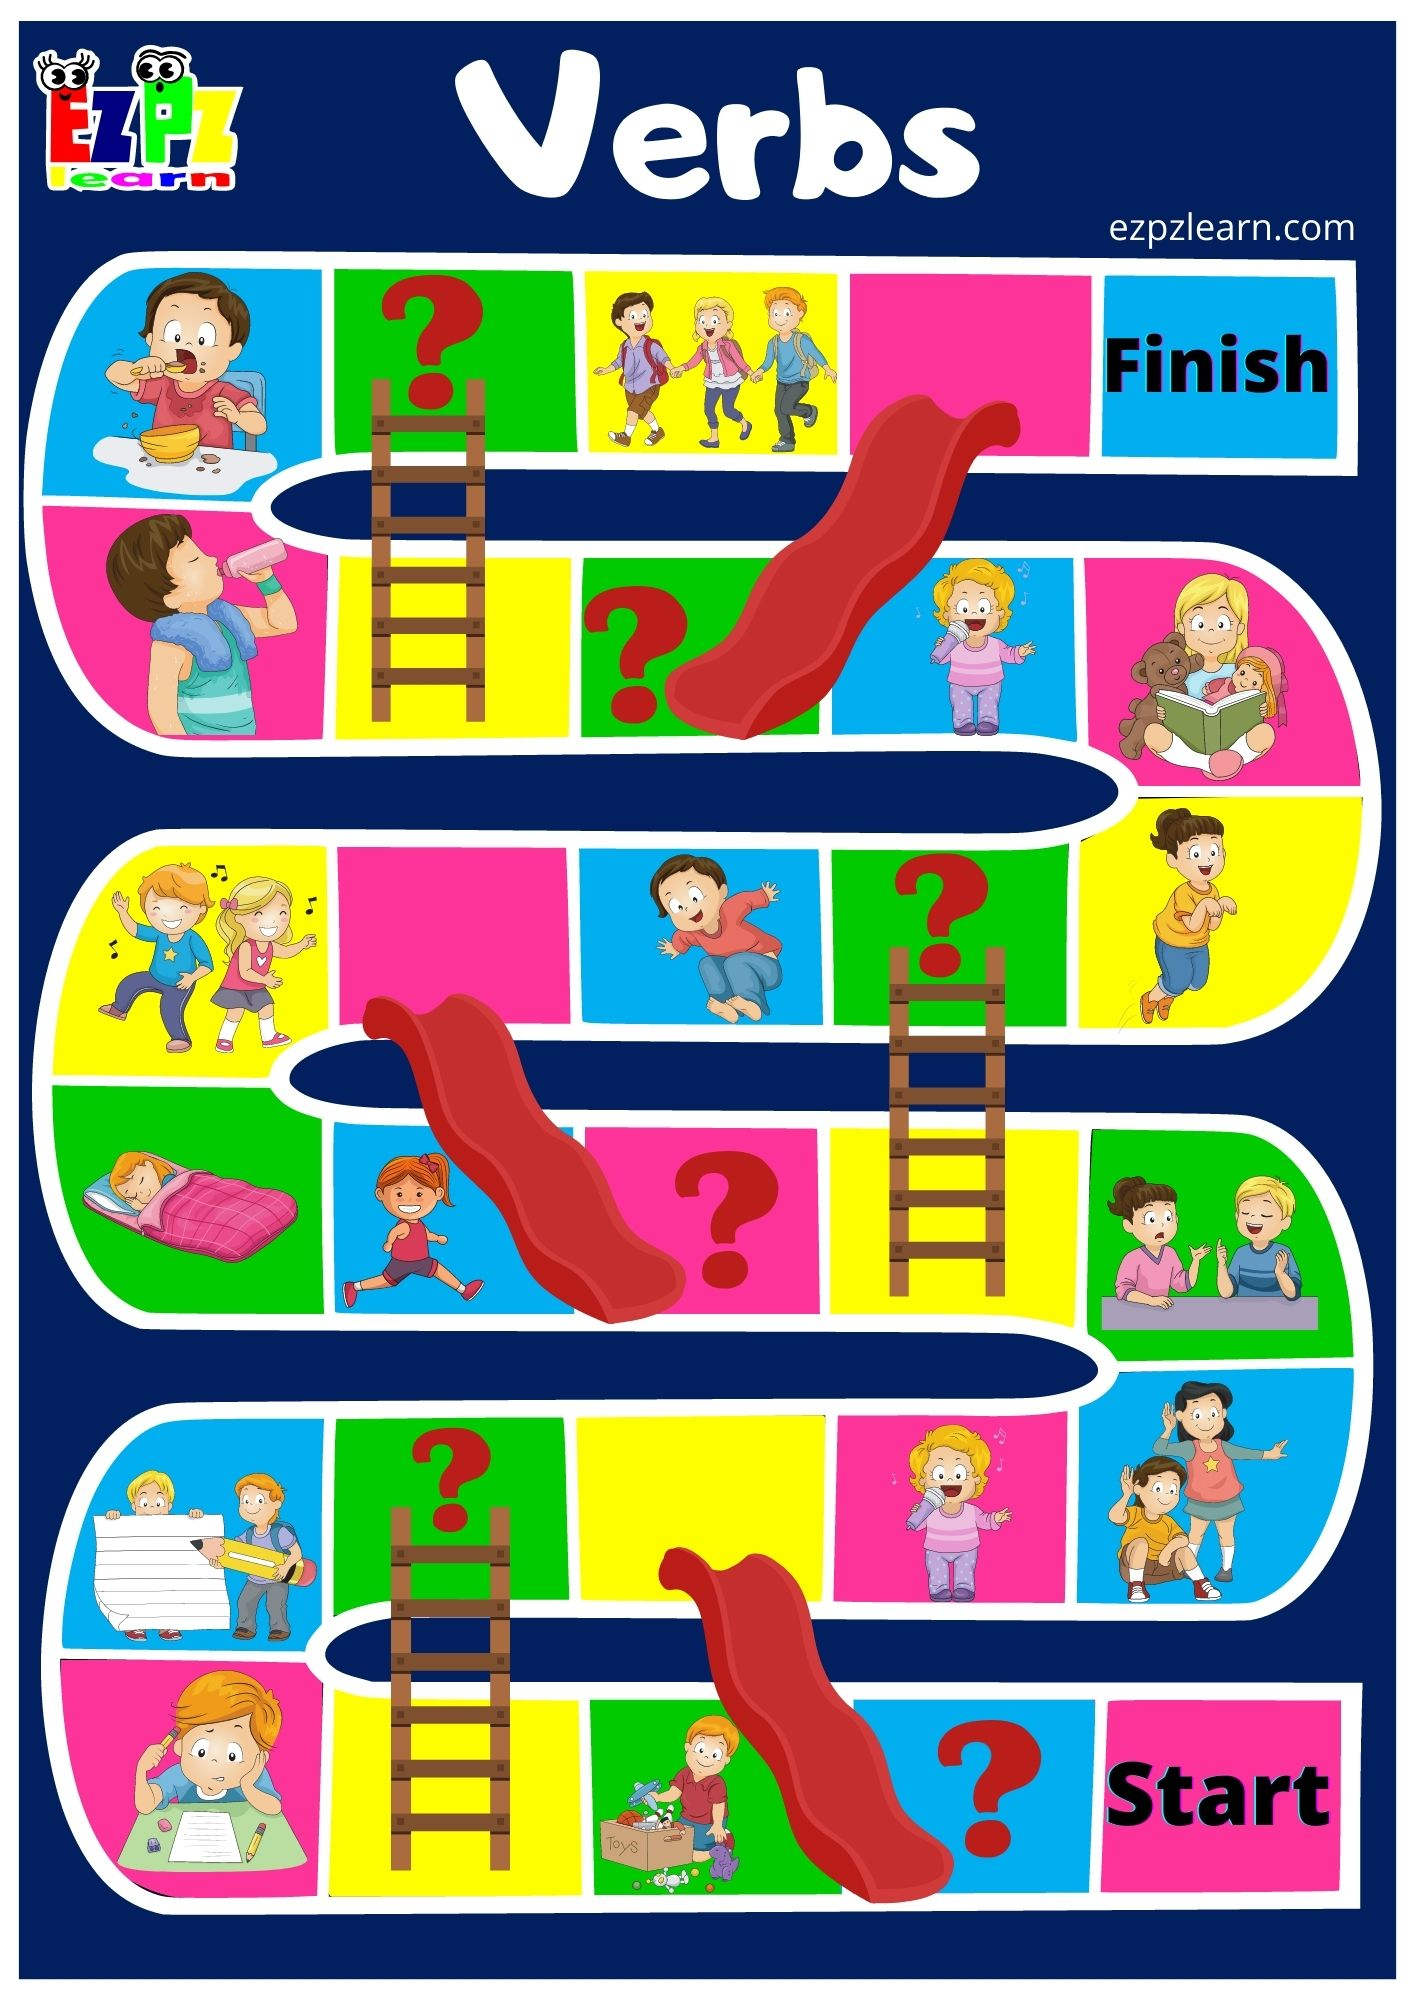 Action Verbs Slides And Ladders Game - Ezpzlearn - Free Printable Verb Games